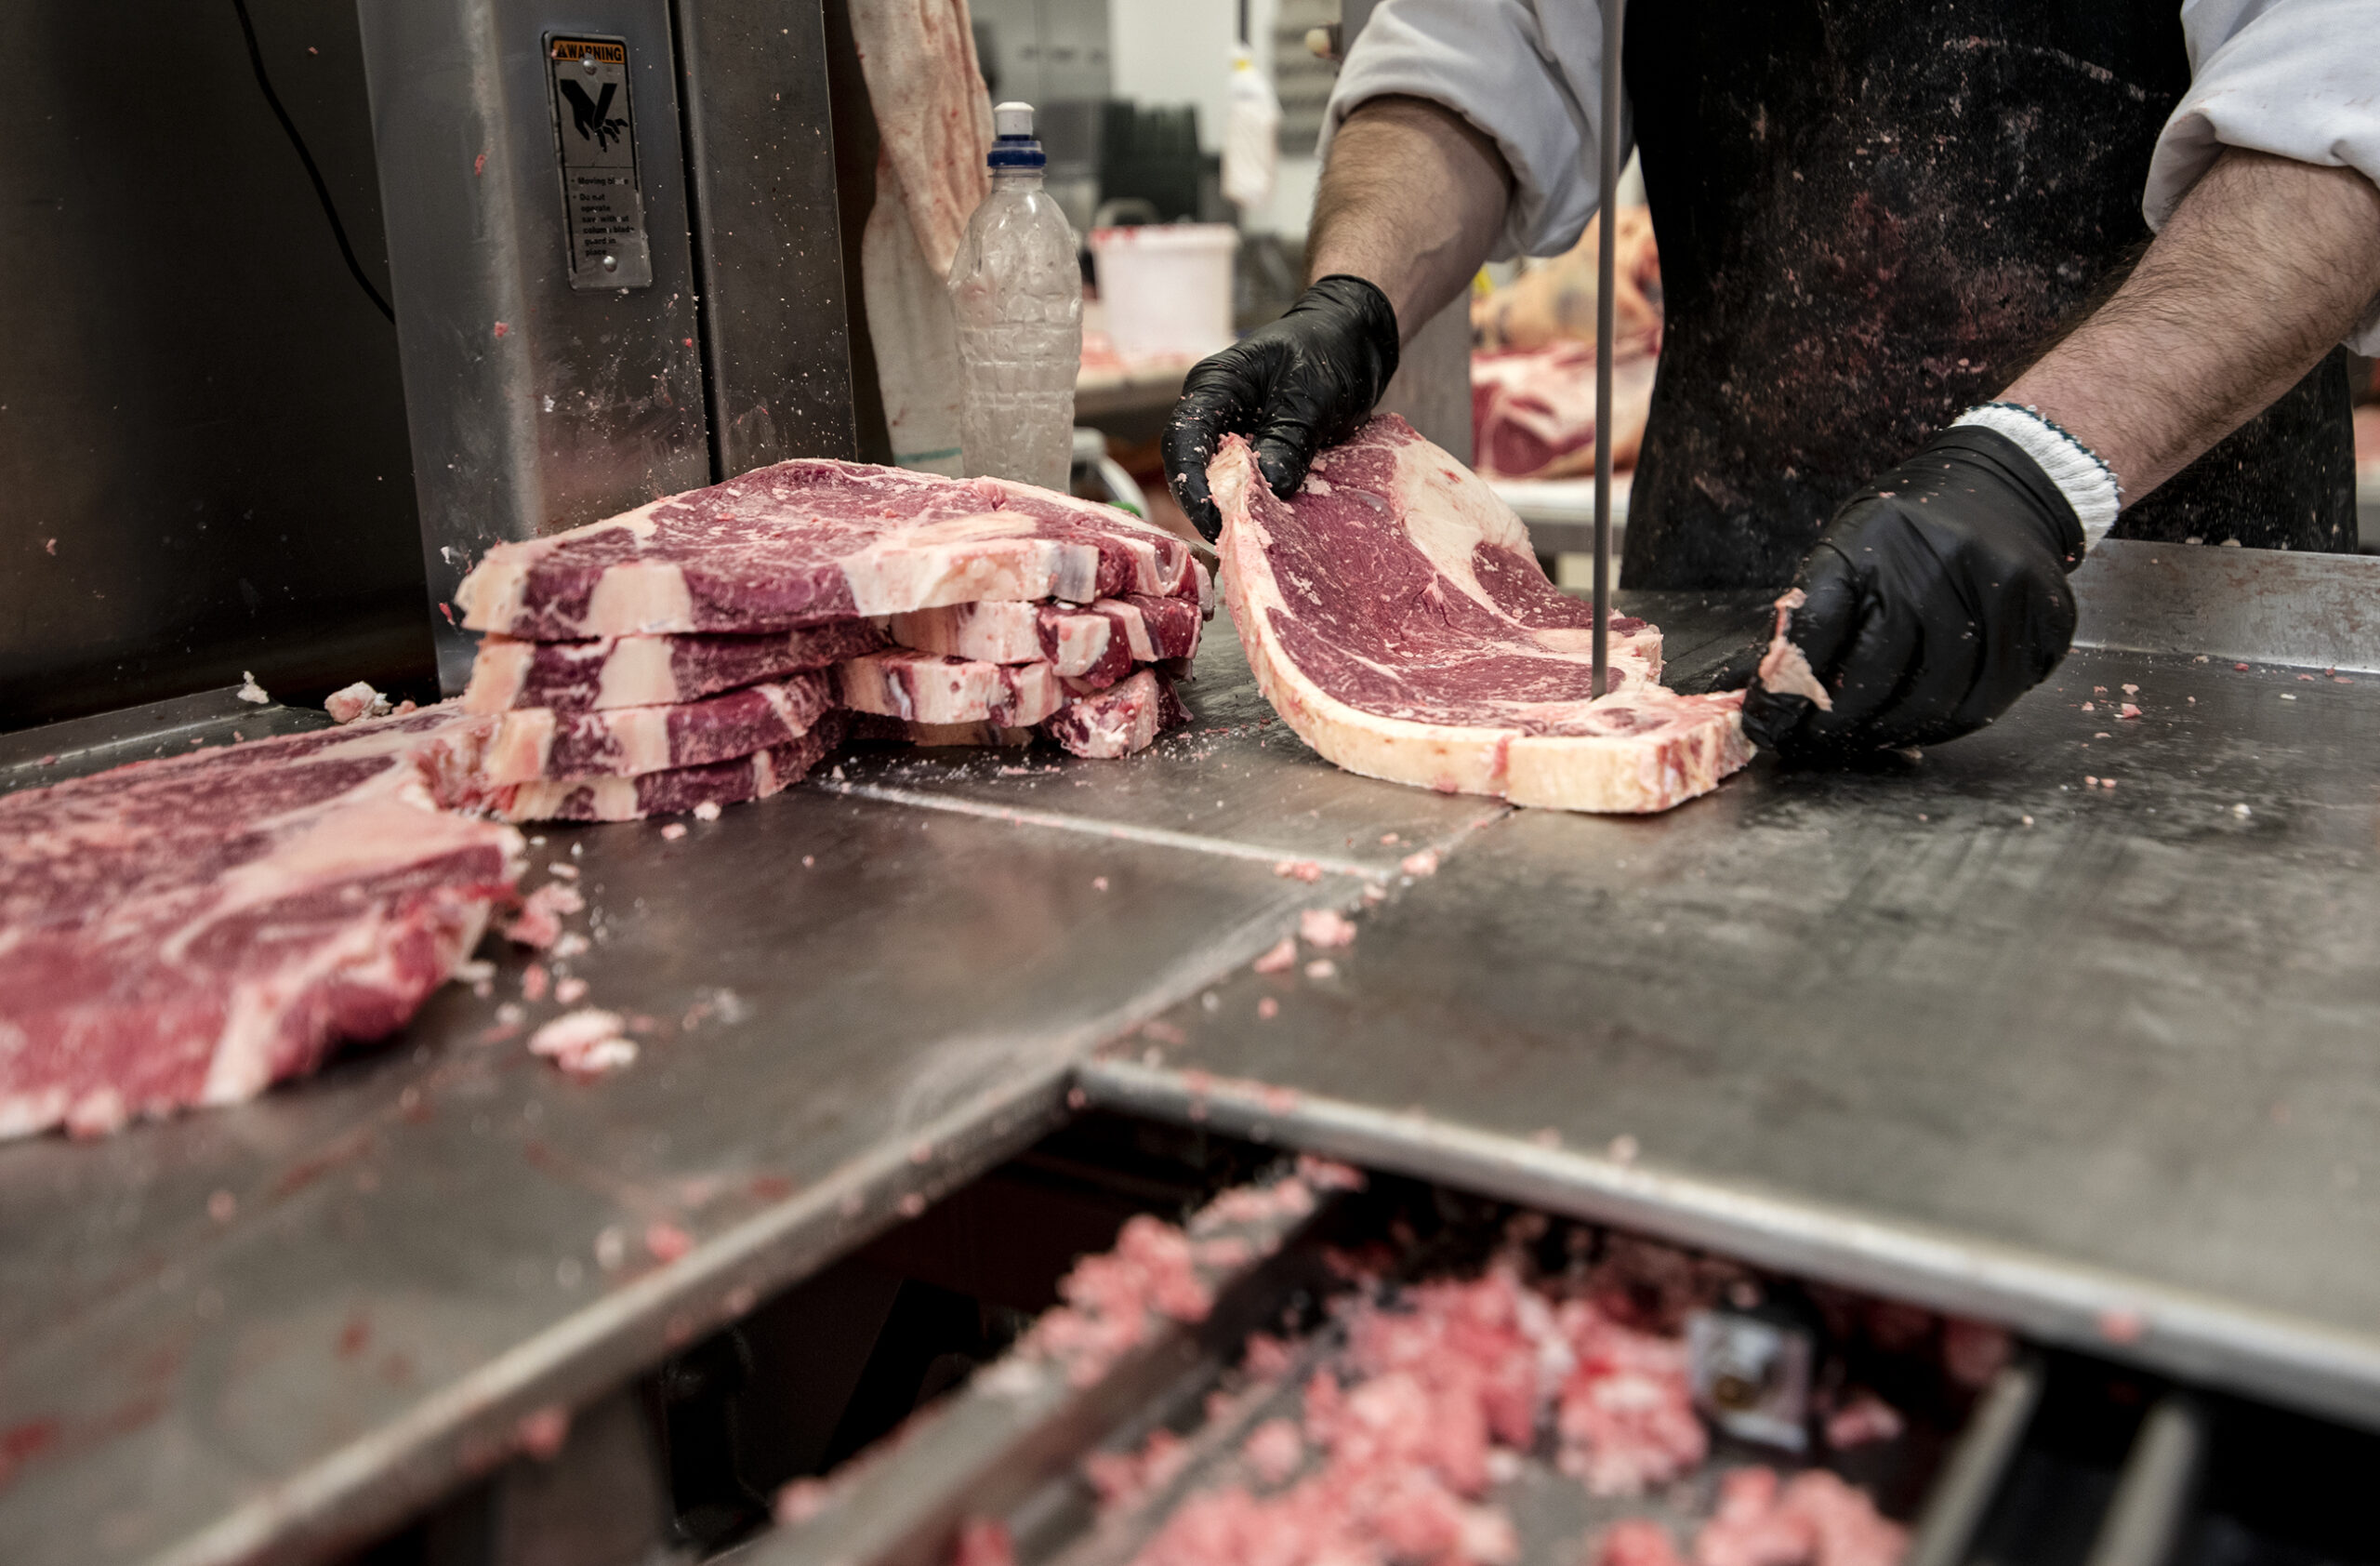 A worker wears black gloves as he slides a piece of meat into a band saw blade